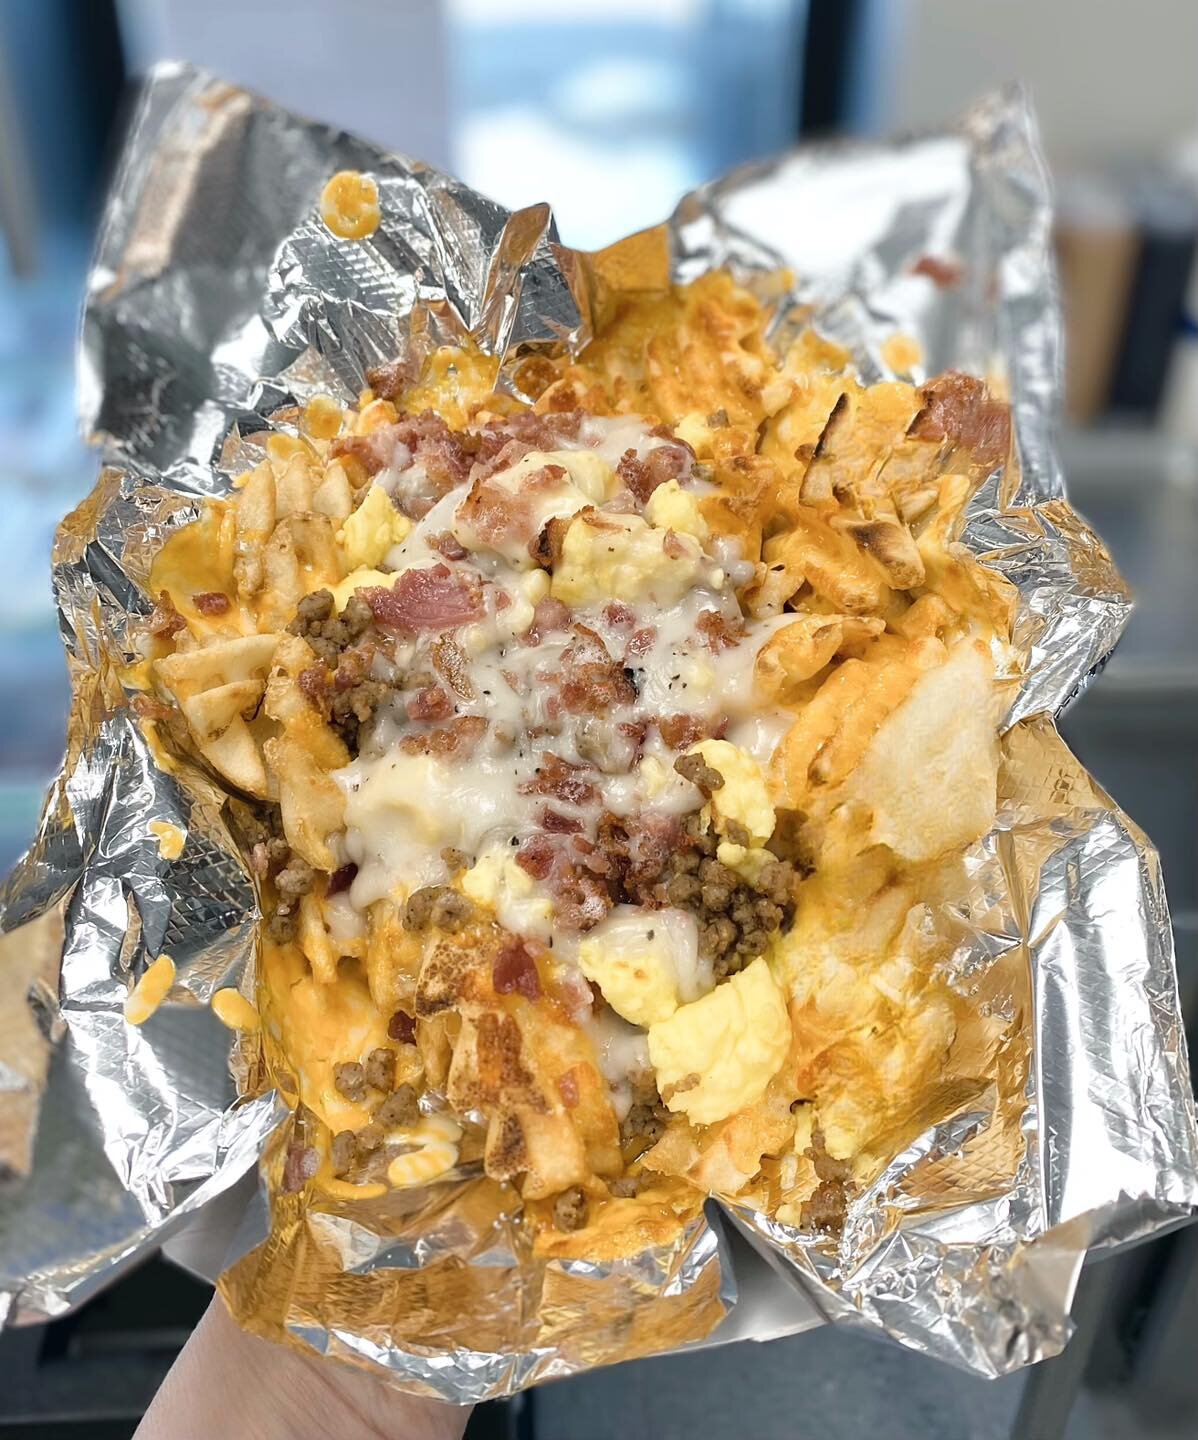 $2 off Breakfast Fries - today only! (3/24)

What are breakfast fries, you ask?:
Crispy waffle fries smothered in country peppered gravy, Colby-Jack cheese, bacon, sausage, and scrambled eggs! 

🦬 🌶️ Delicious with a side of Buffalo sauce! 

#break